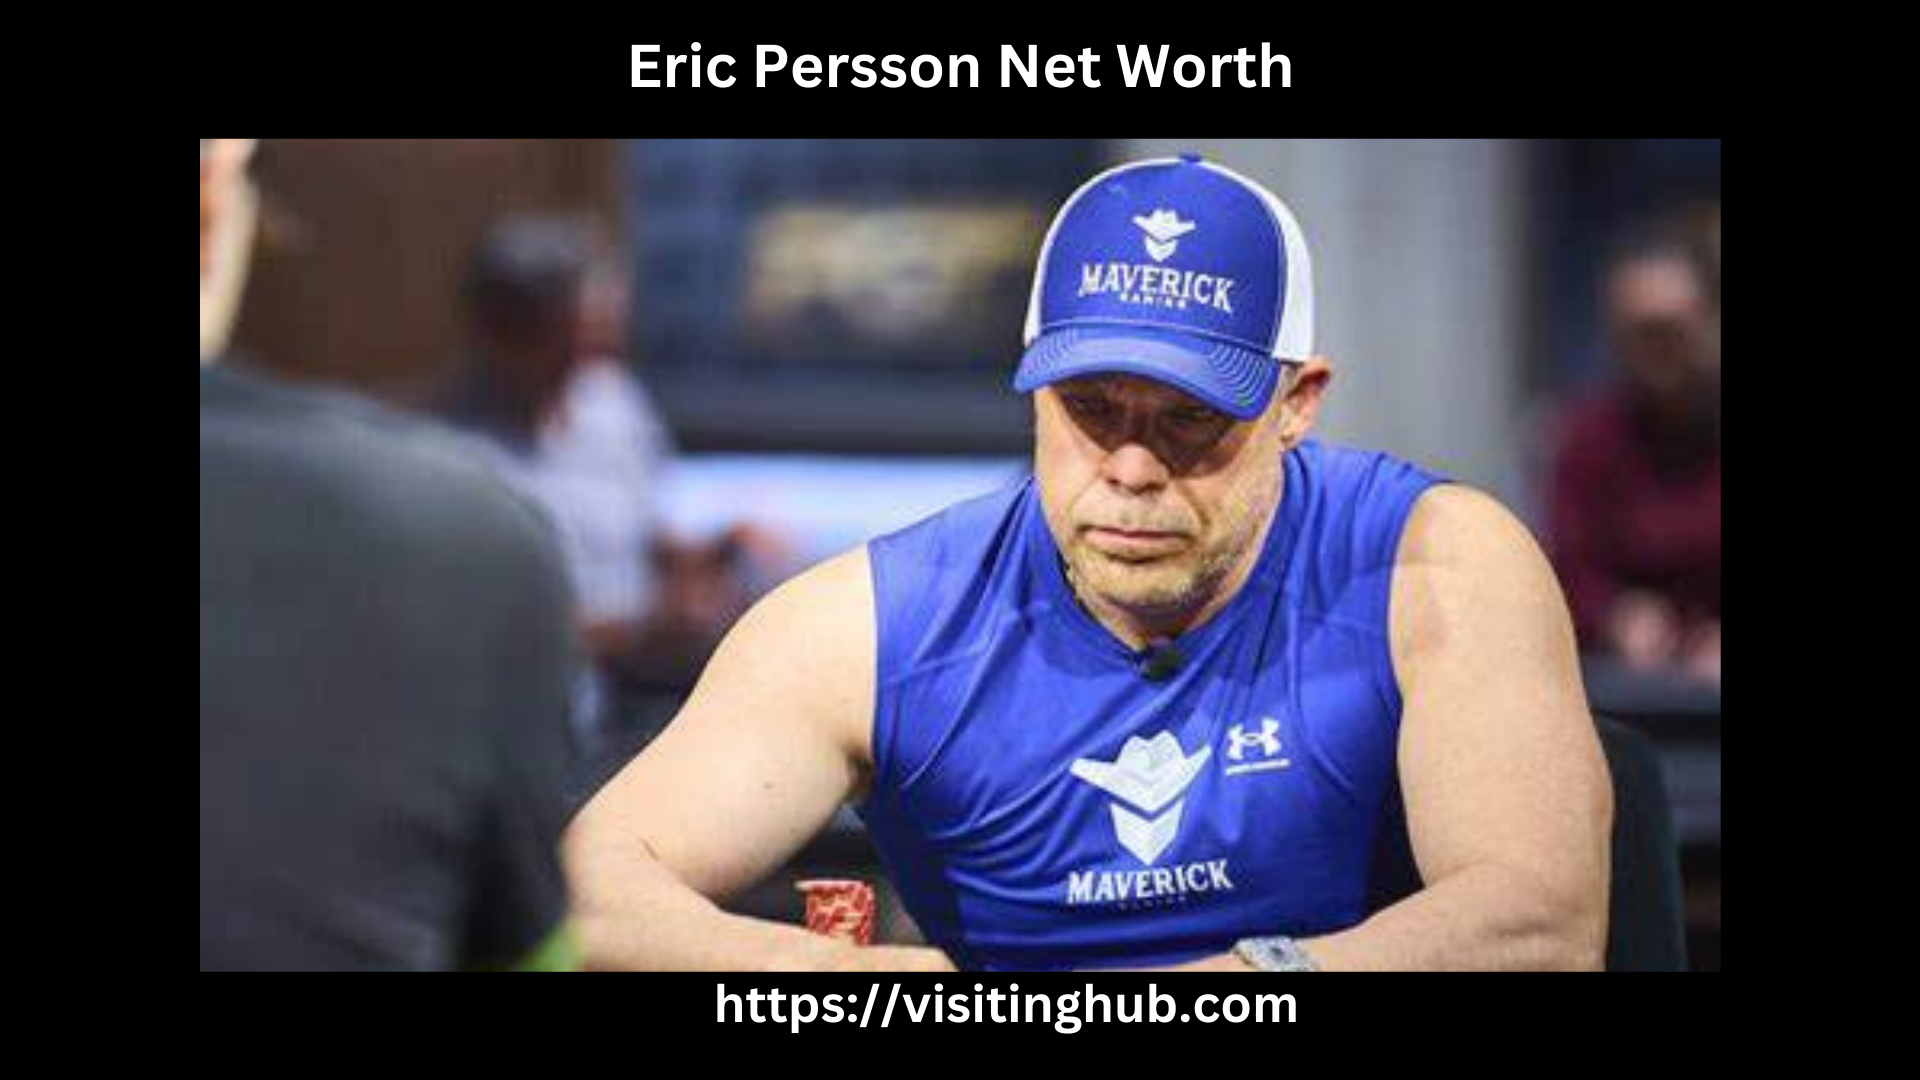 Eric Persson Net Worth